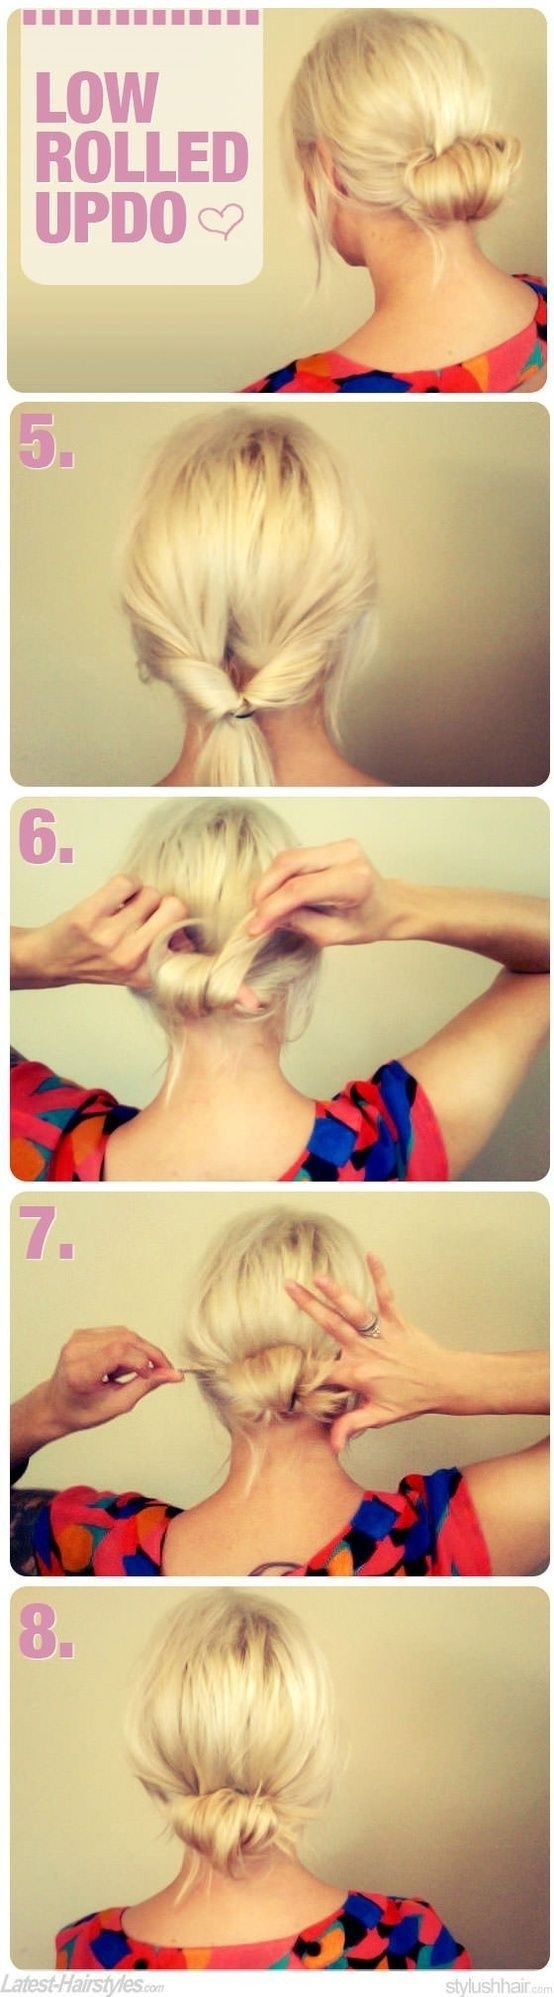 Low Rolled Updo Hairstyles